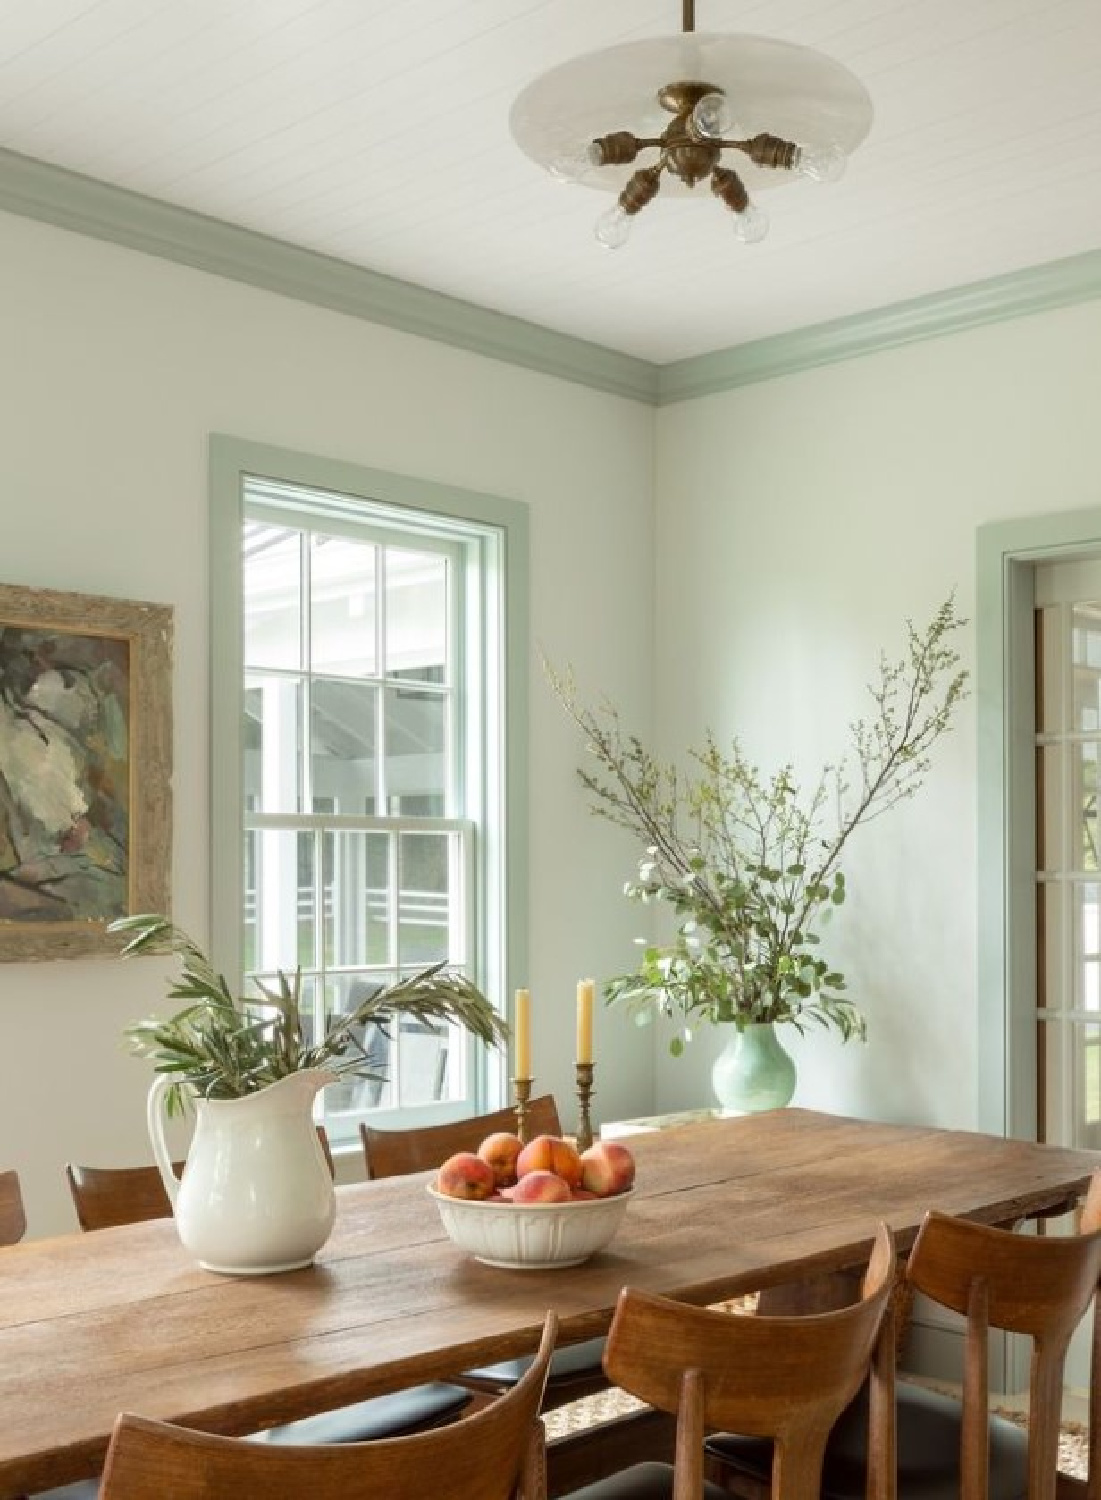 Beautiful country dining room with celadon trim in a home by Joshua Smith. #celadonpaintcolor #greeninteriors #greentrim